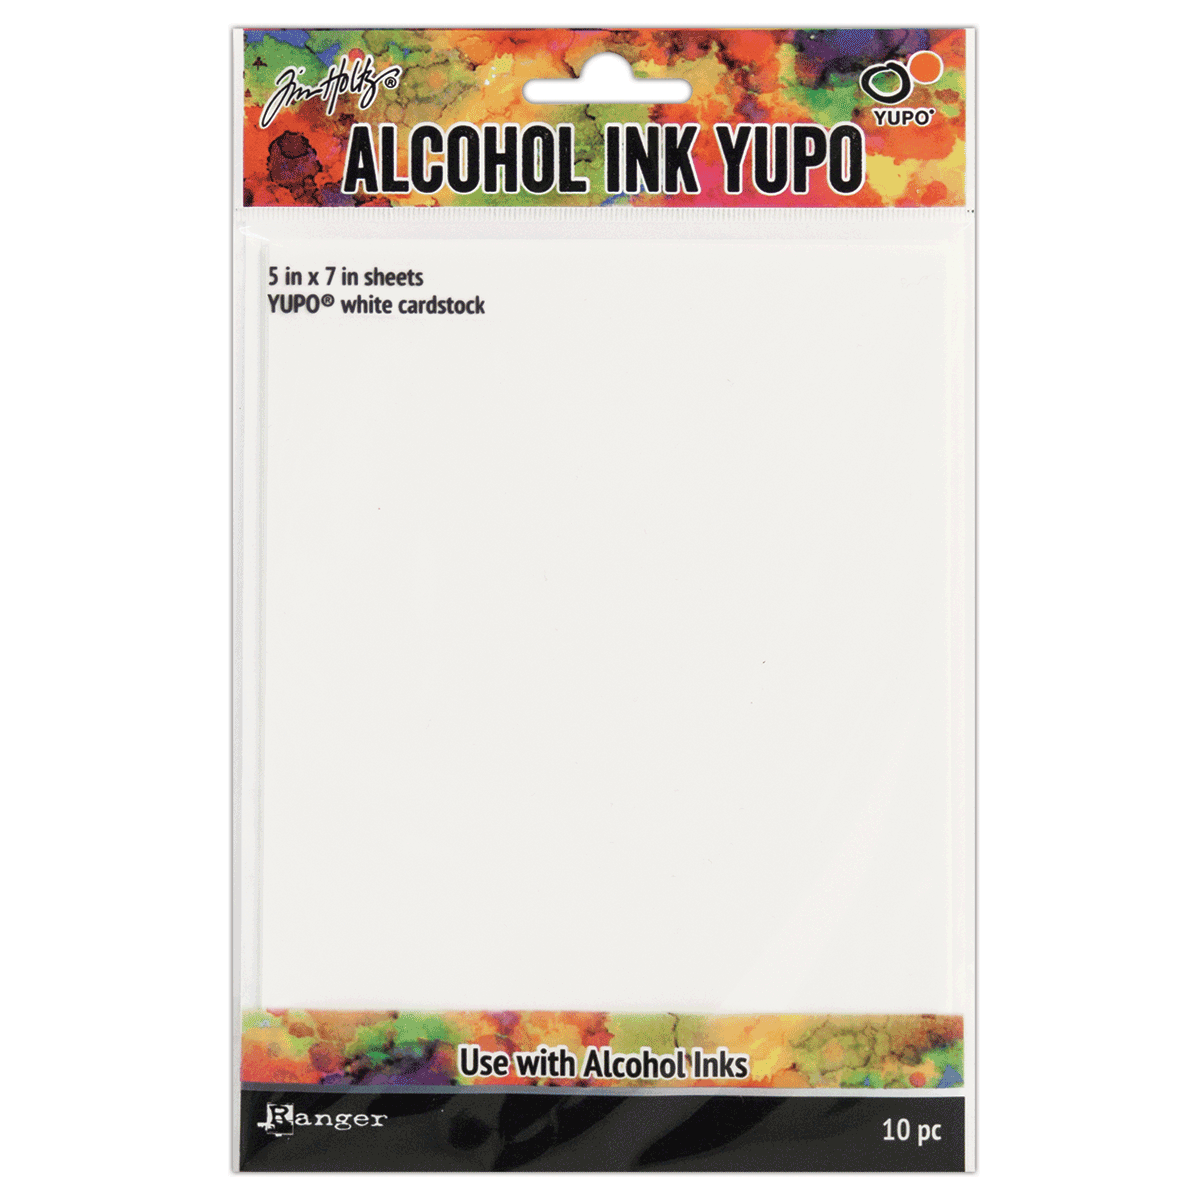 Tim Holtz Alcohol Ink Yupo White cardstock (5x7in) 10pc